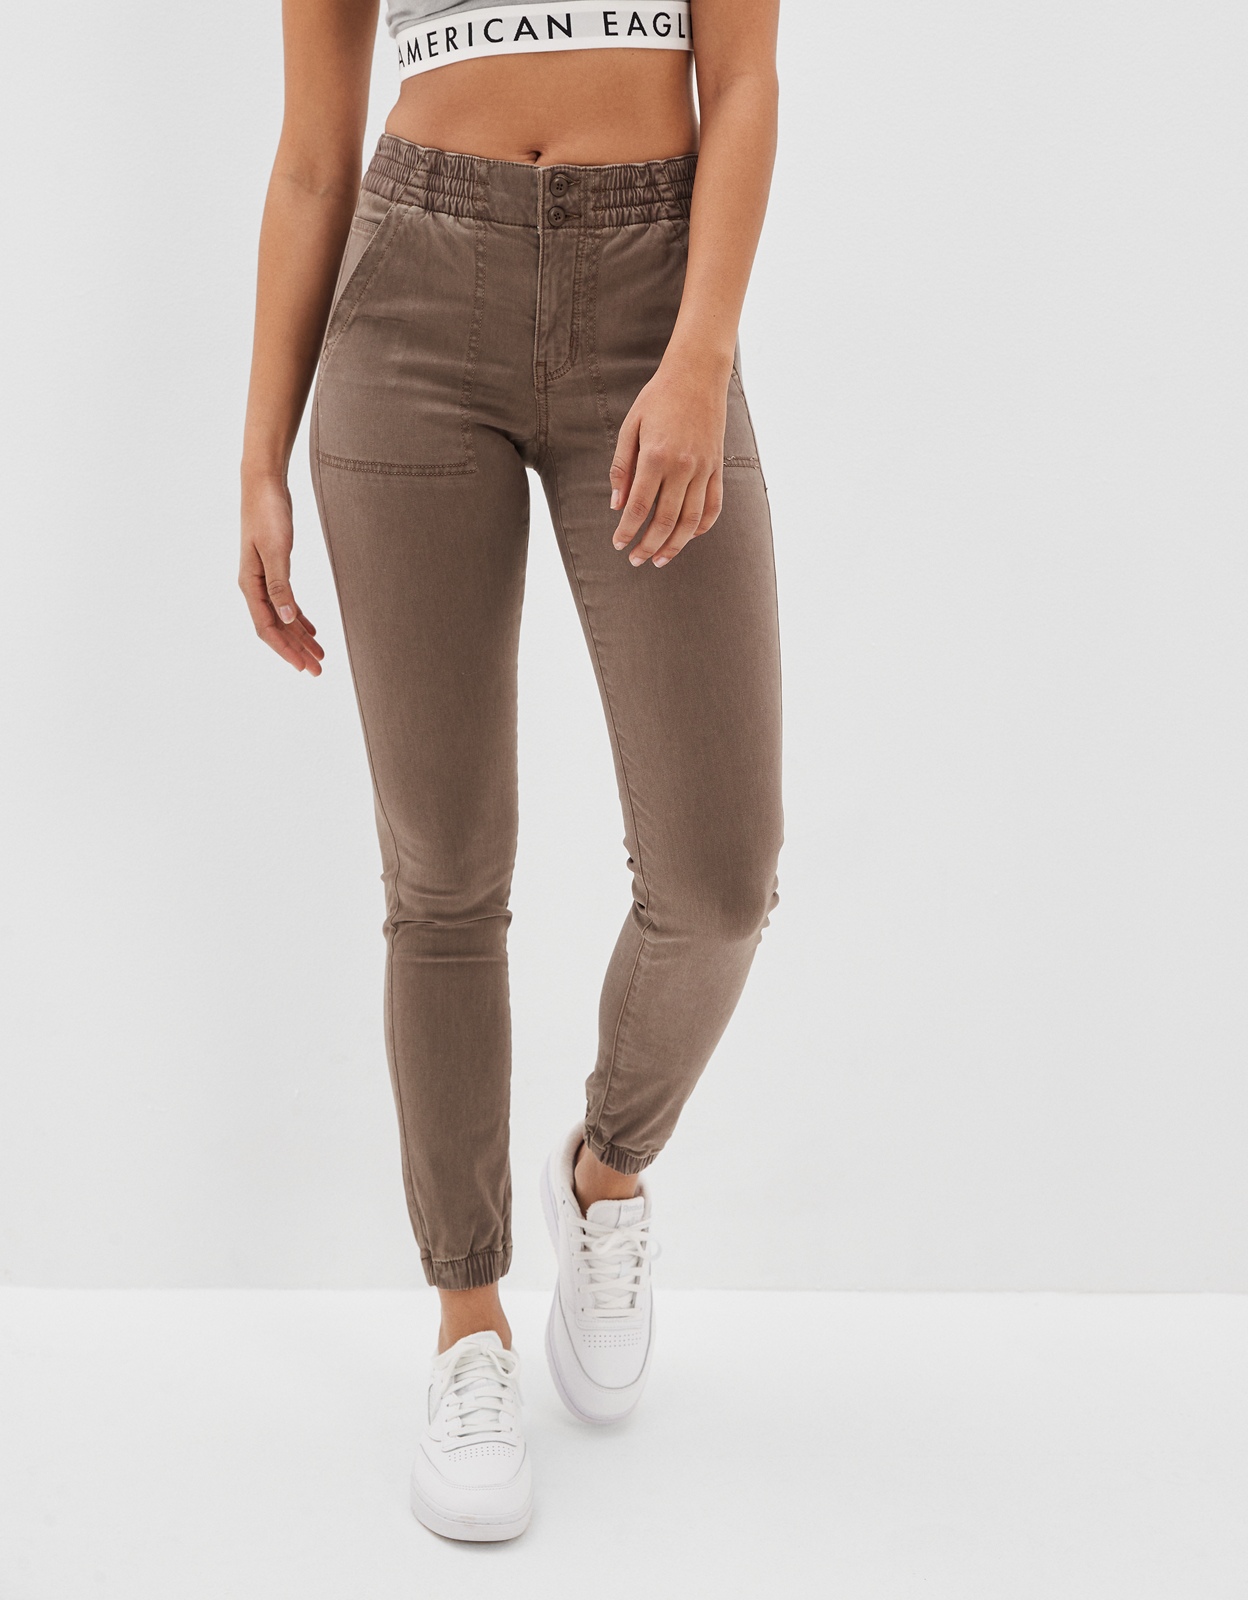 Shop AE Stretch High-Waisted Jegging Jogger online